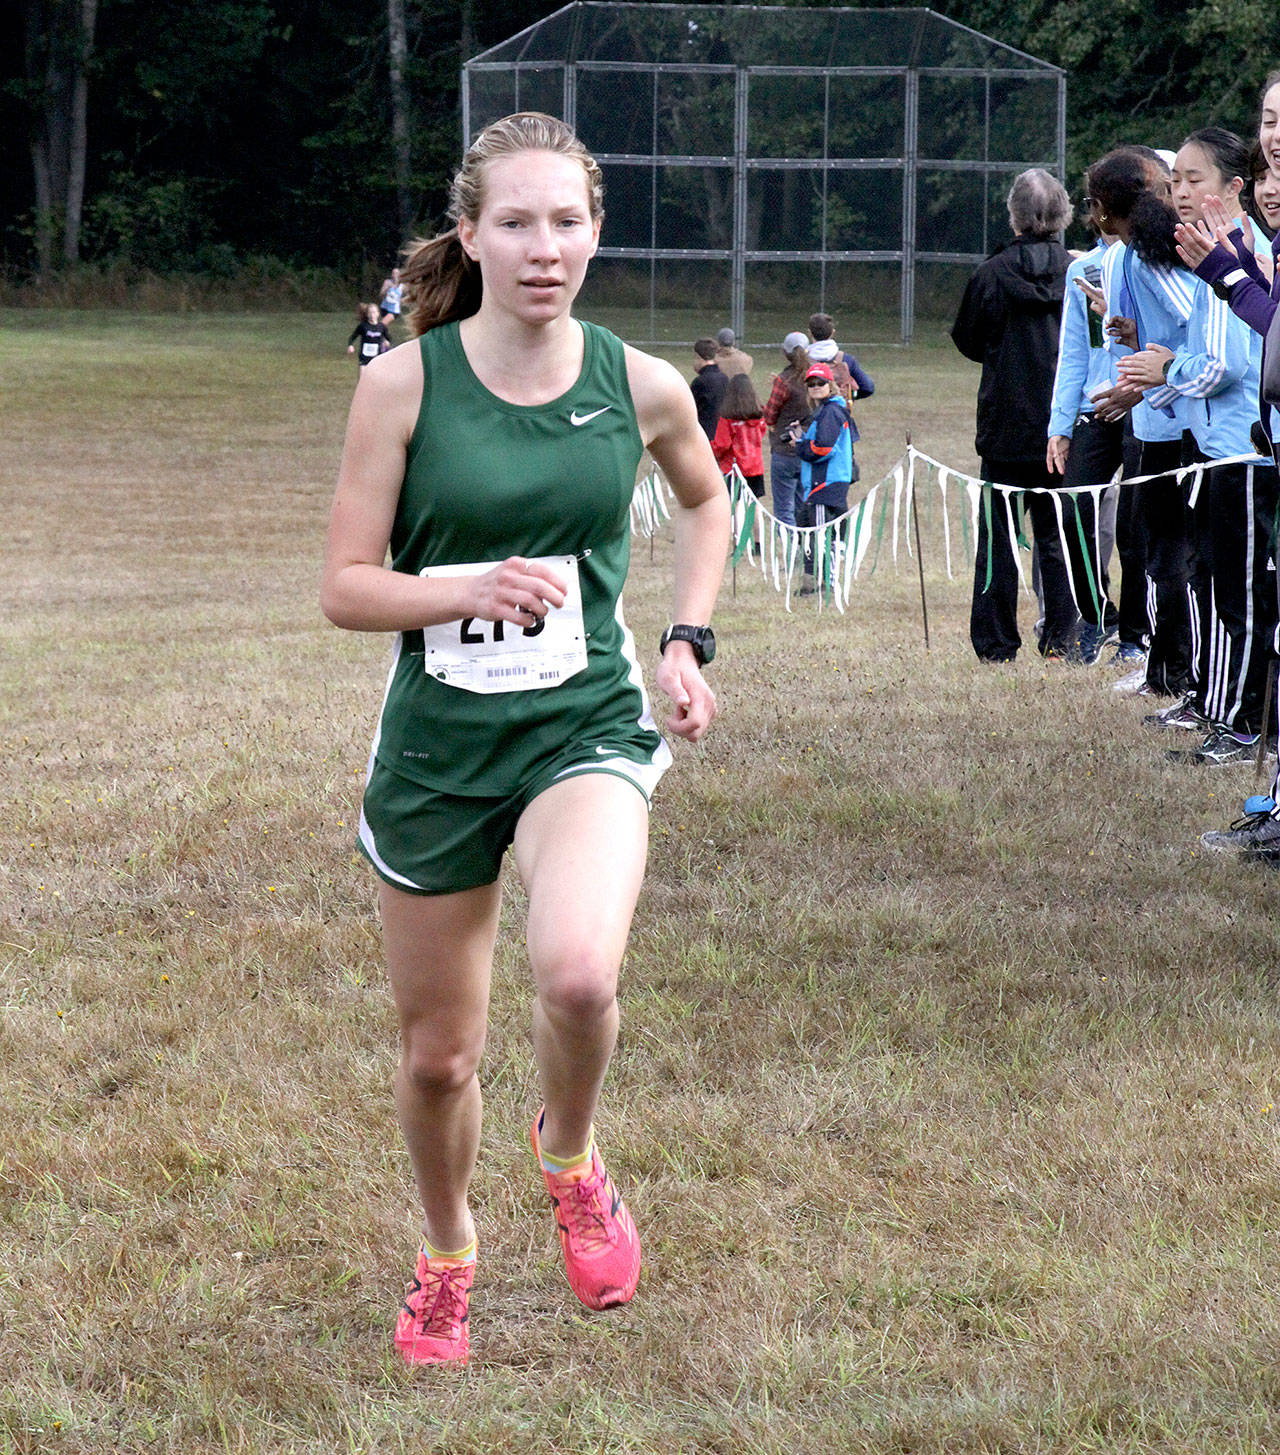 Dave Logan/for Peninsula Daily News Port Angeles’ Lauren Larson wraps up a win at the Salt Creek Invitational earlier this month. The Washington State Cross Country Coaches Association ranked the Roughriders’ girls team No. 1 in Class 2A this week.